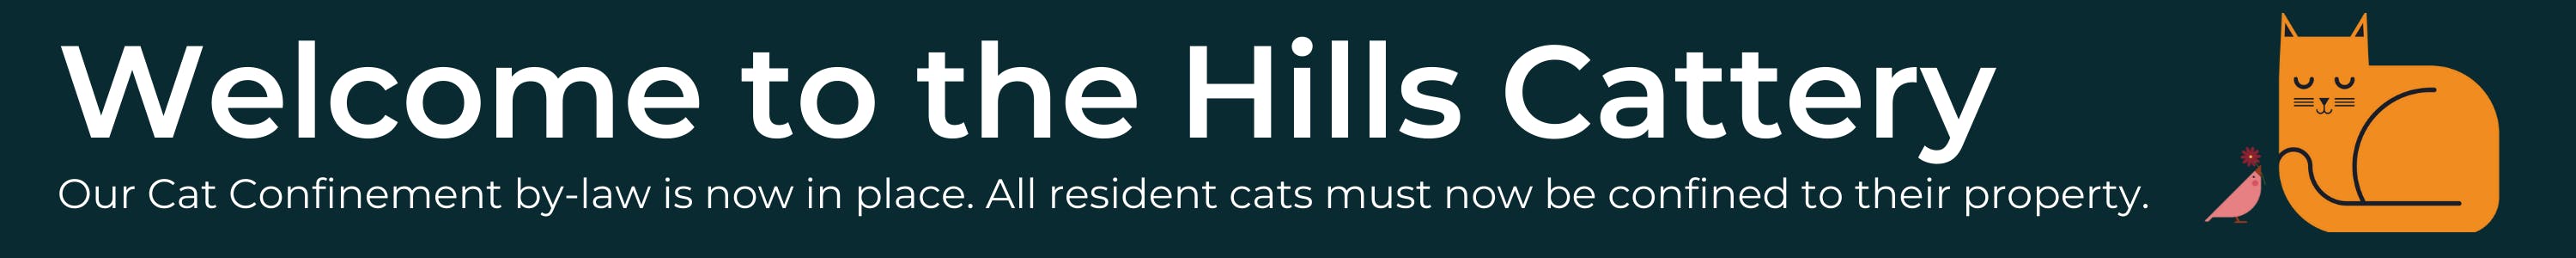 Welcome to the Hills Cattery